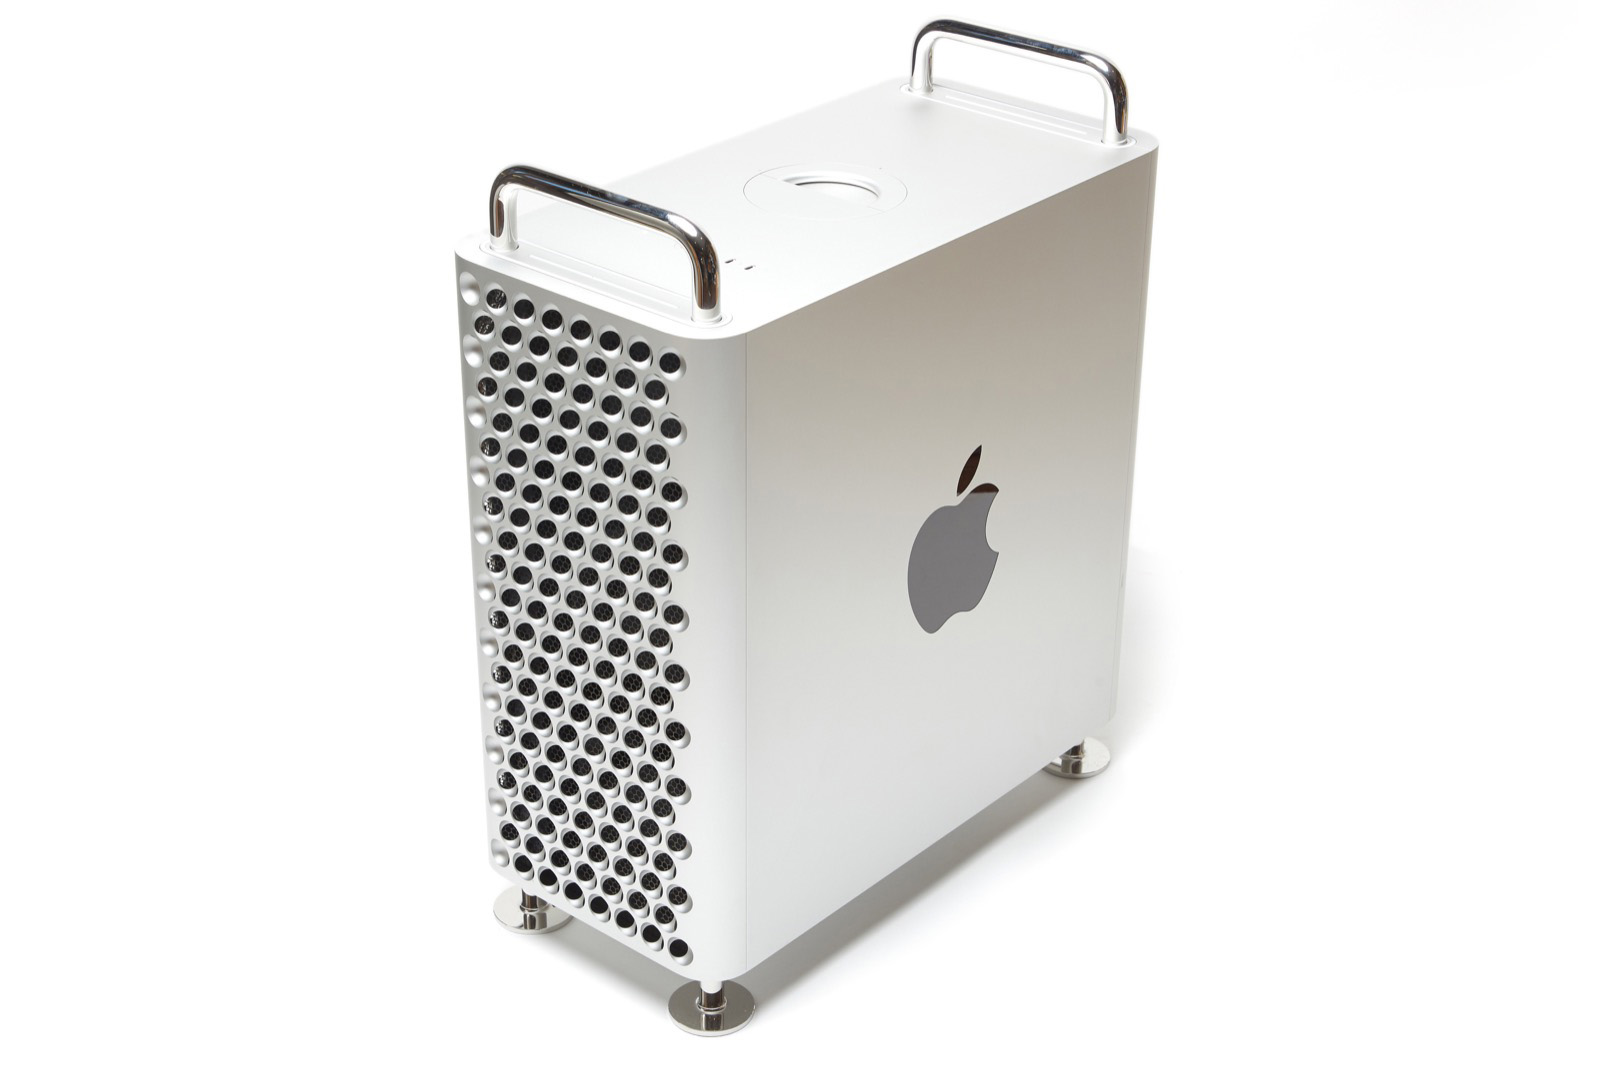 Apple's new Mac Pro makes for a terrible cheese grater, too